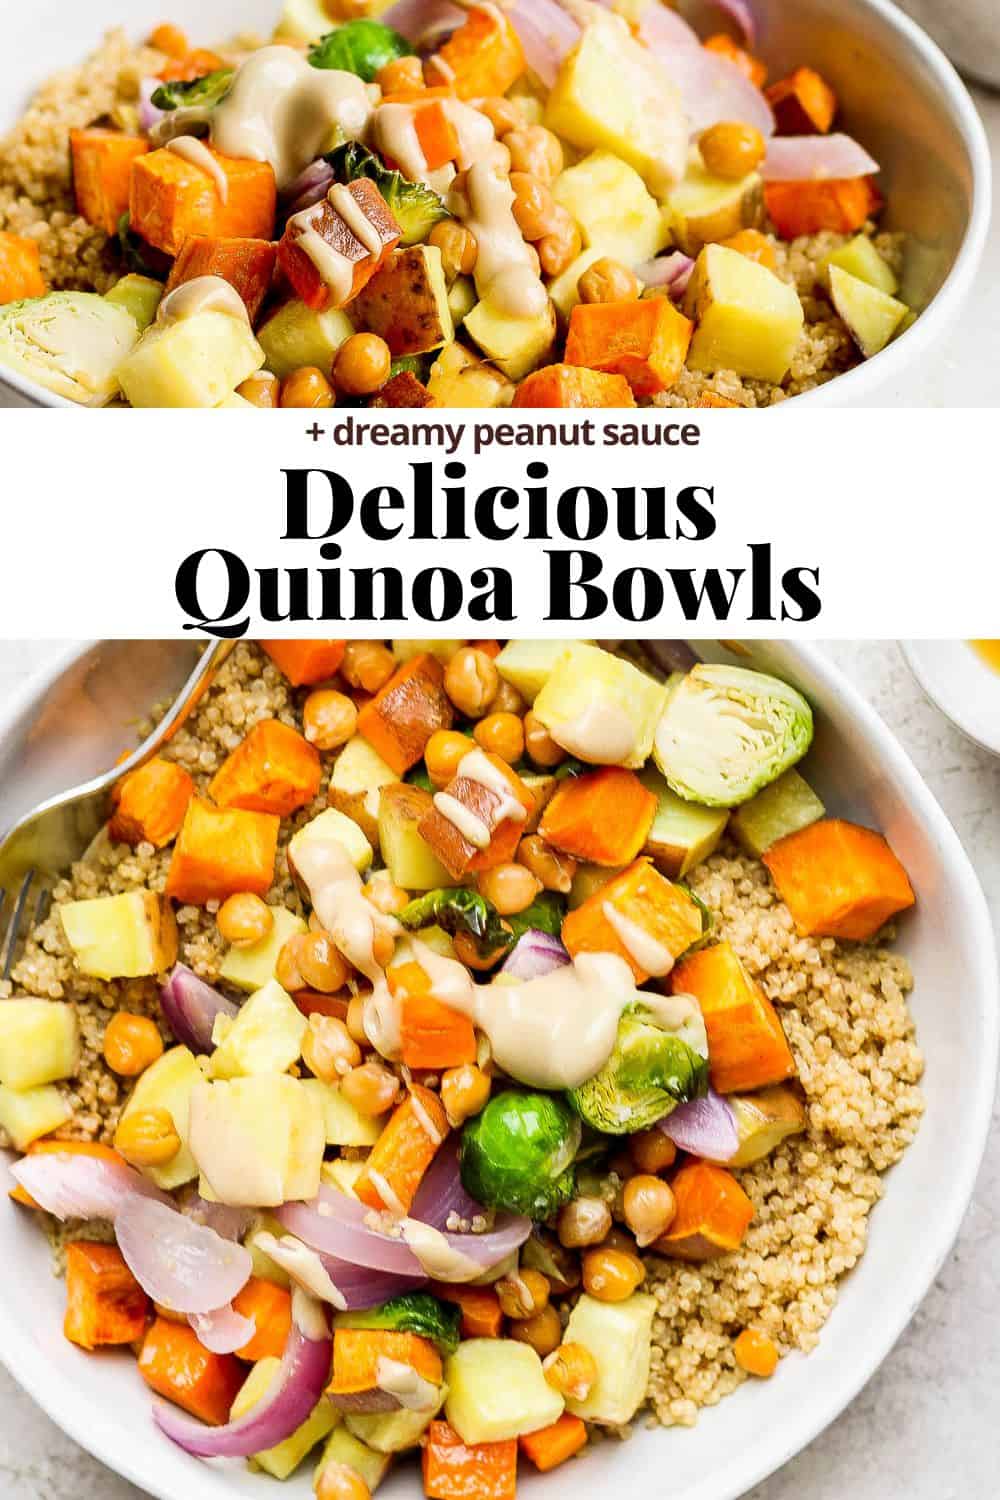 The pinterest image showing a profile image of the quinoa bowl, the title of the recipe, and a top down image of the quinoa bowl. 